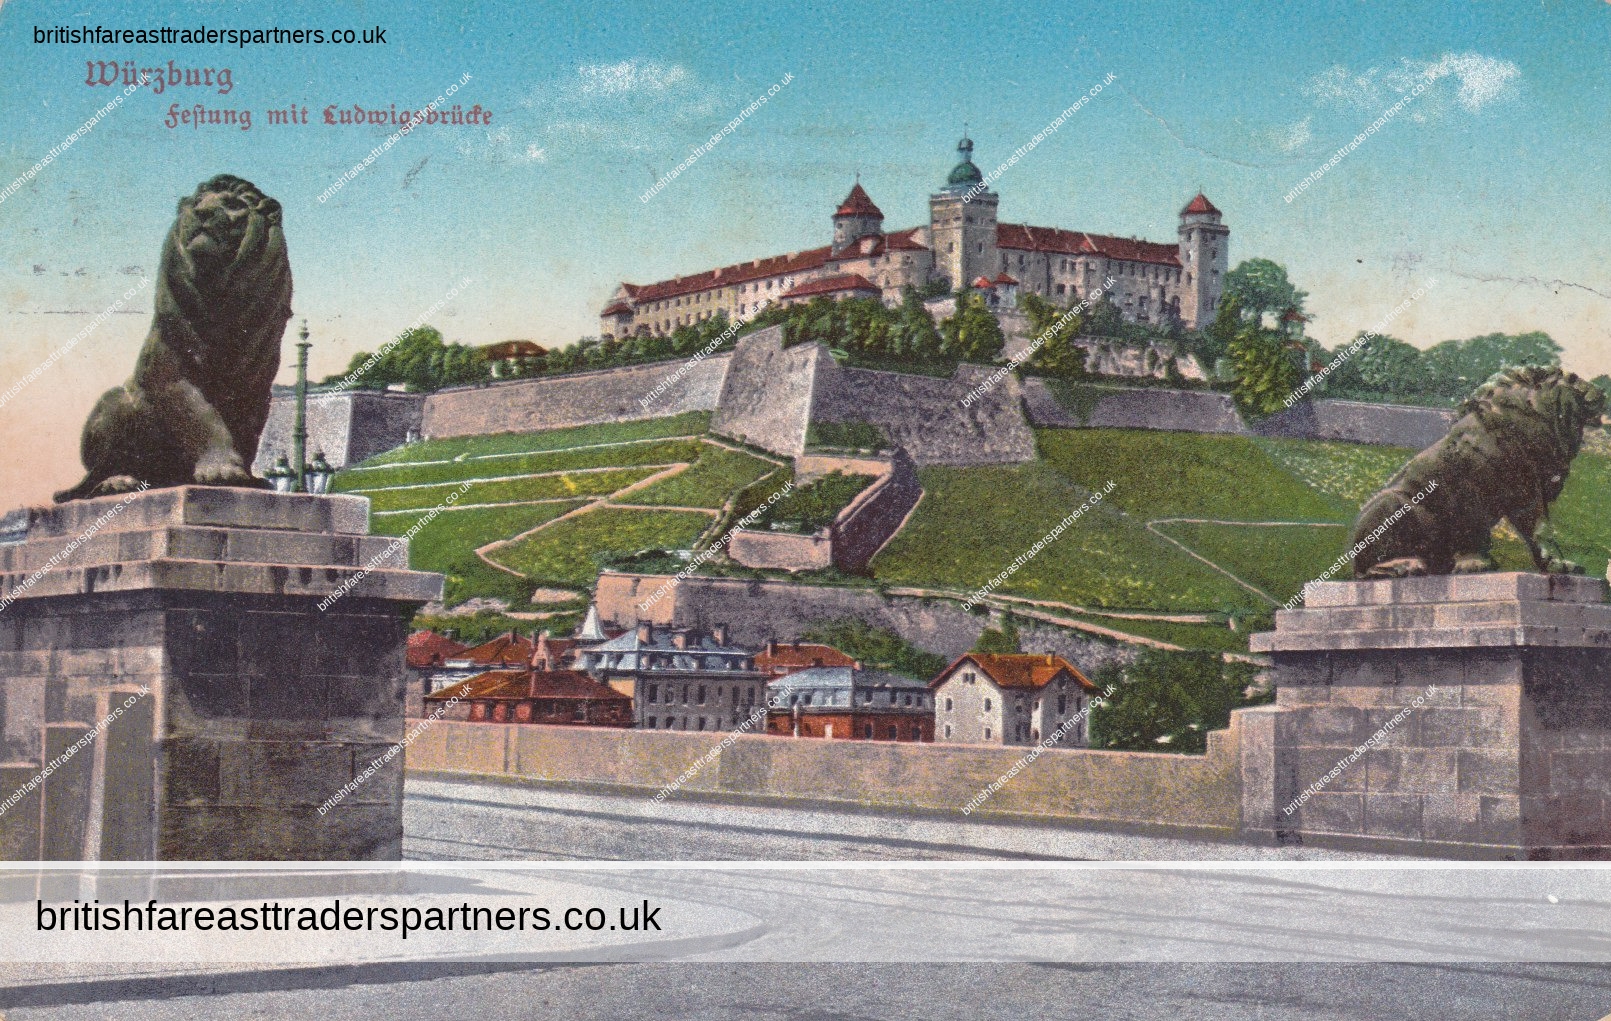 ANTIQUE GERMANY POSTCARD “Würzburg Festung mit Ludwigsbrude” ANTIQUE | GERMANY | TOWNS & CITIES |  HERITAGE | HISTORY